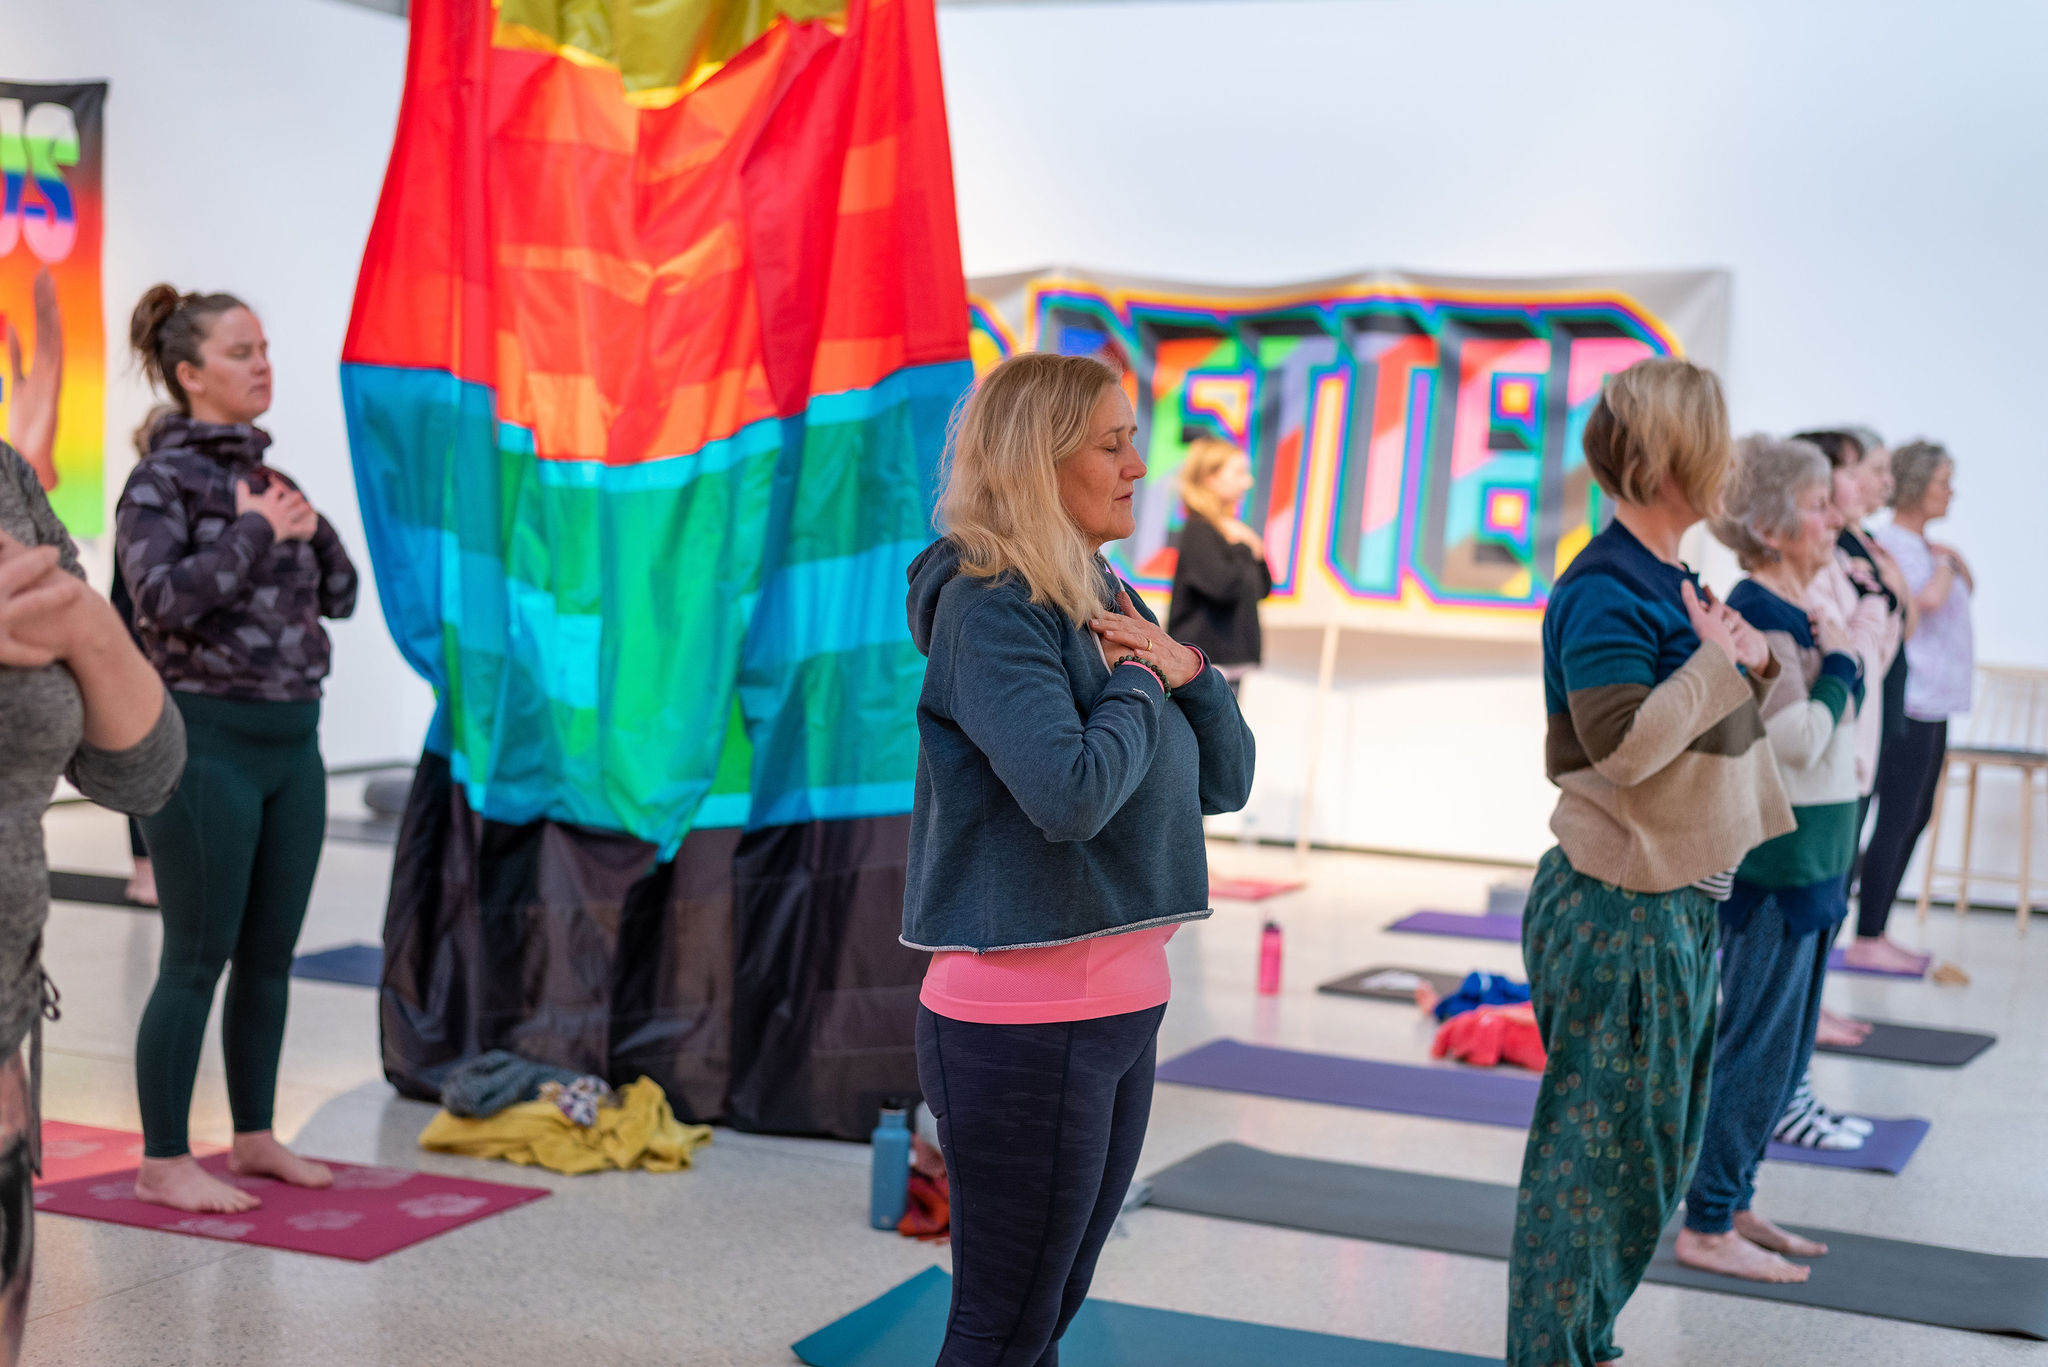 A group of people practicing yoga inside a gallery space, with colourful fabric hangings and paintings.